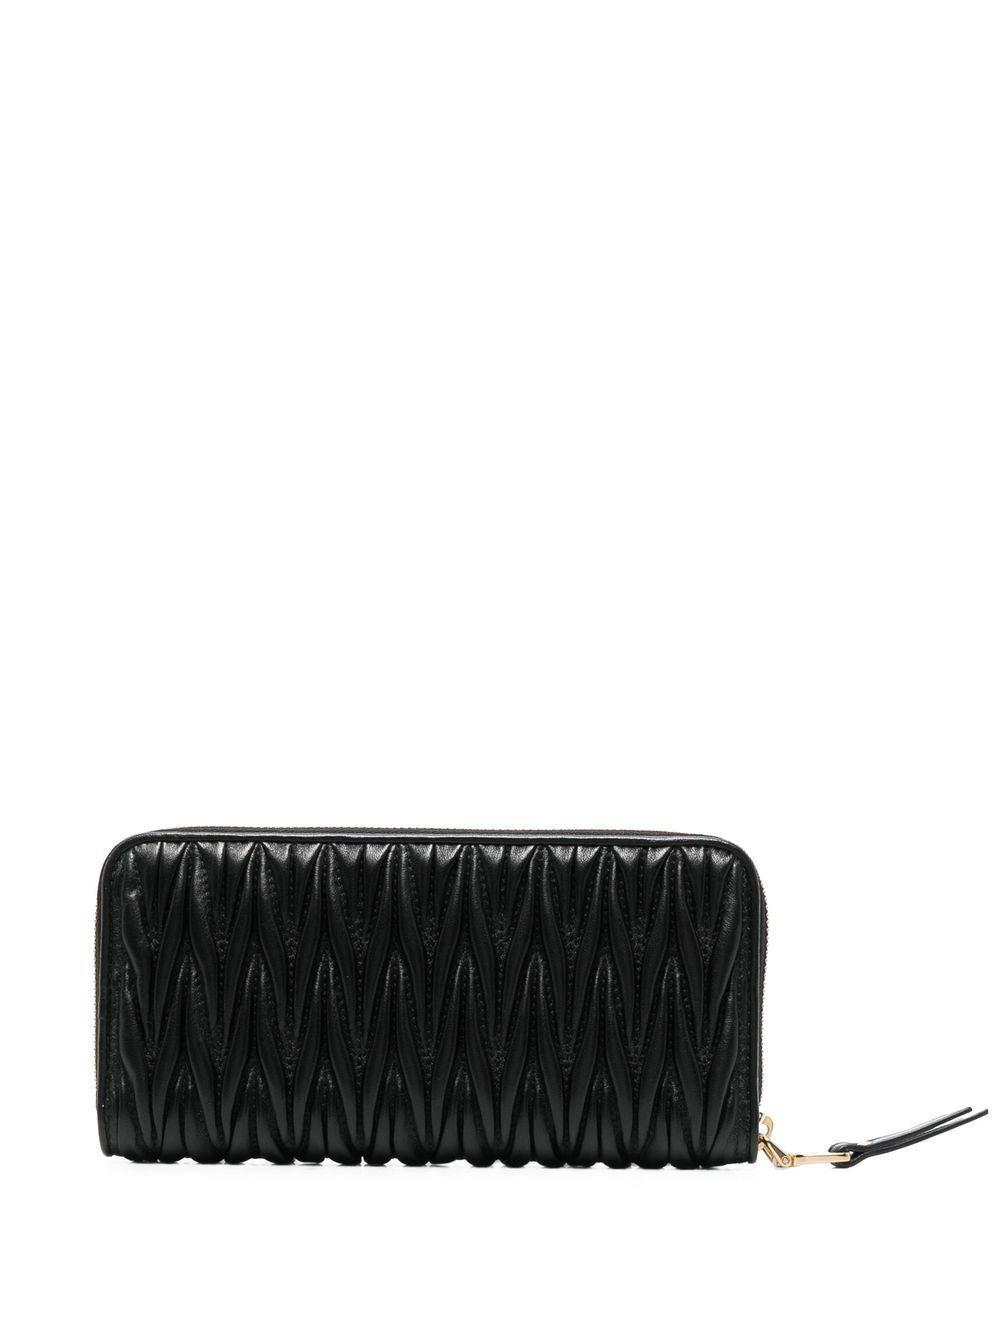 Miu Miu Logo-plaque Quilted Leather Wallet in Black | Lyst